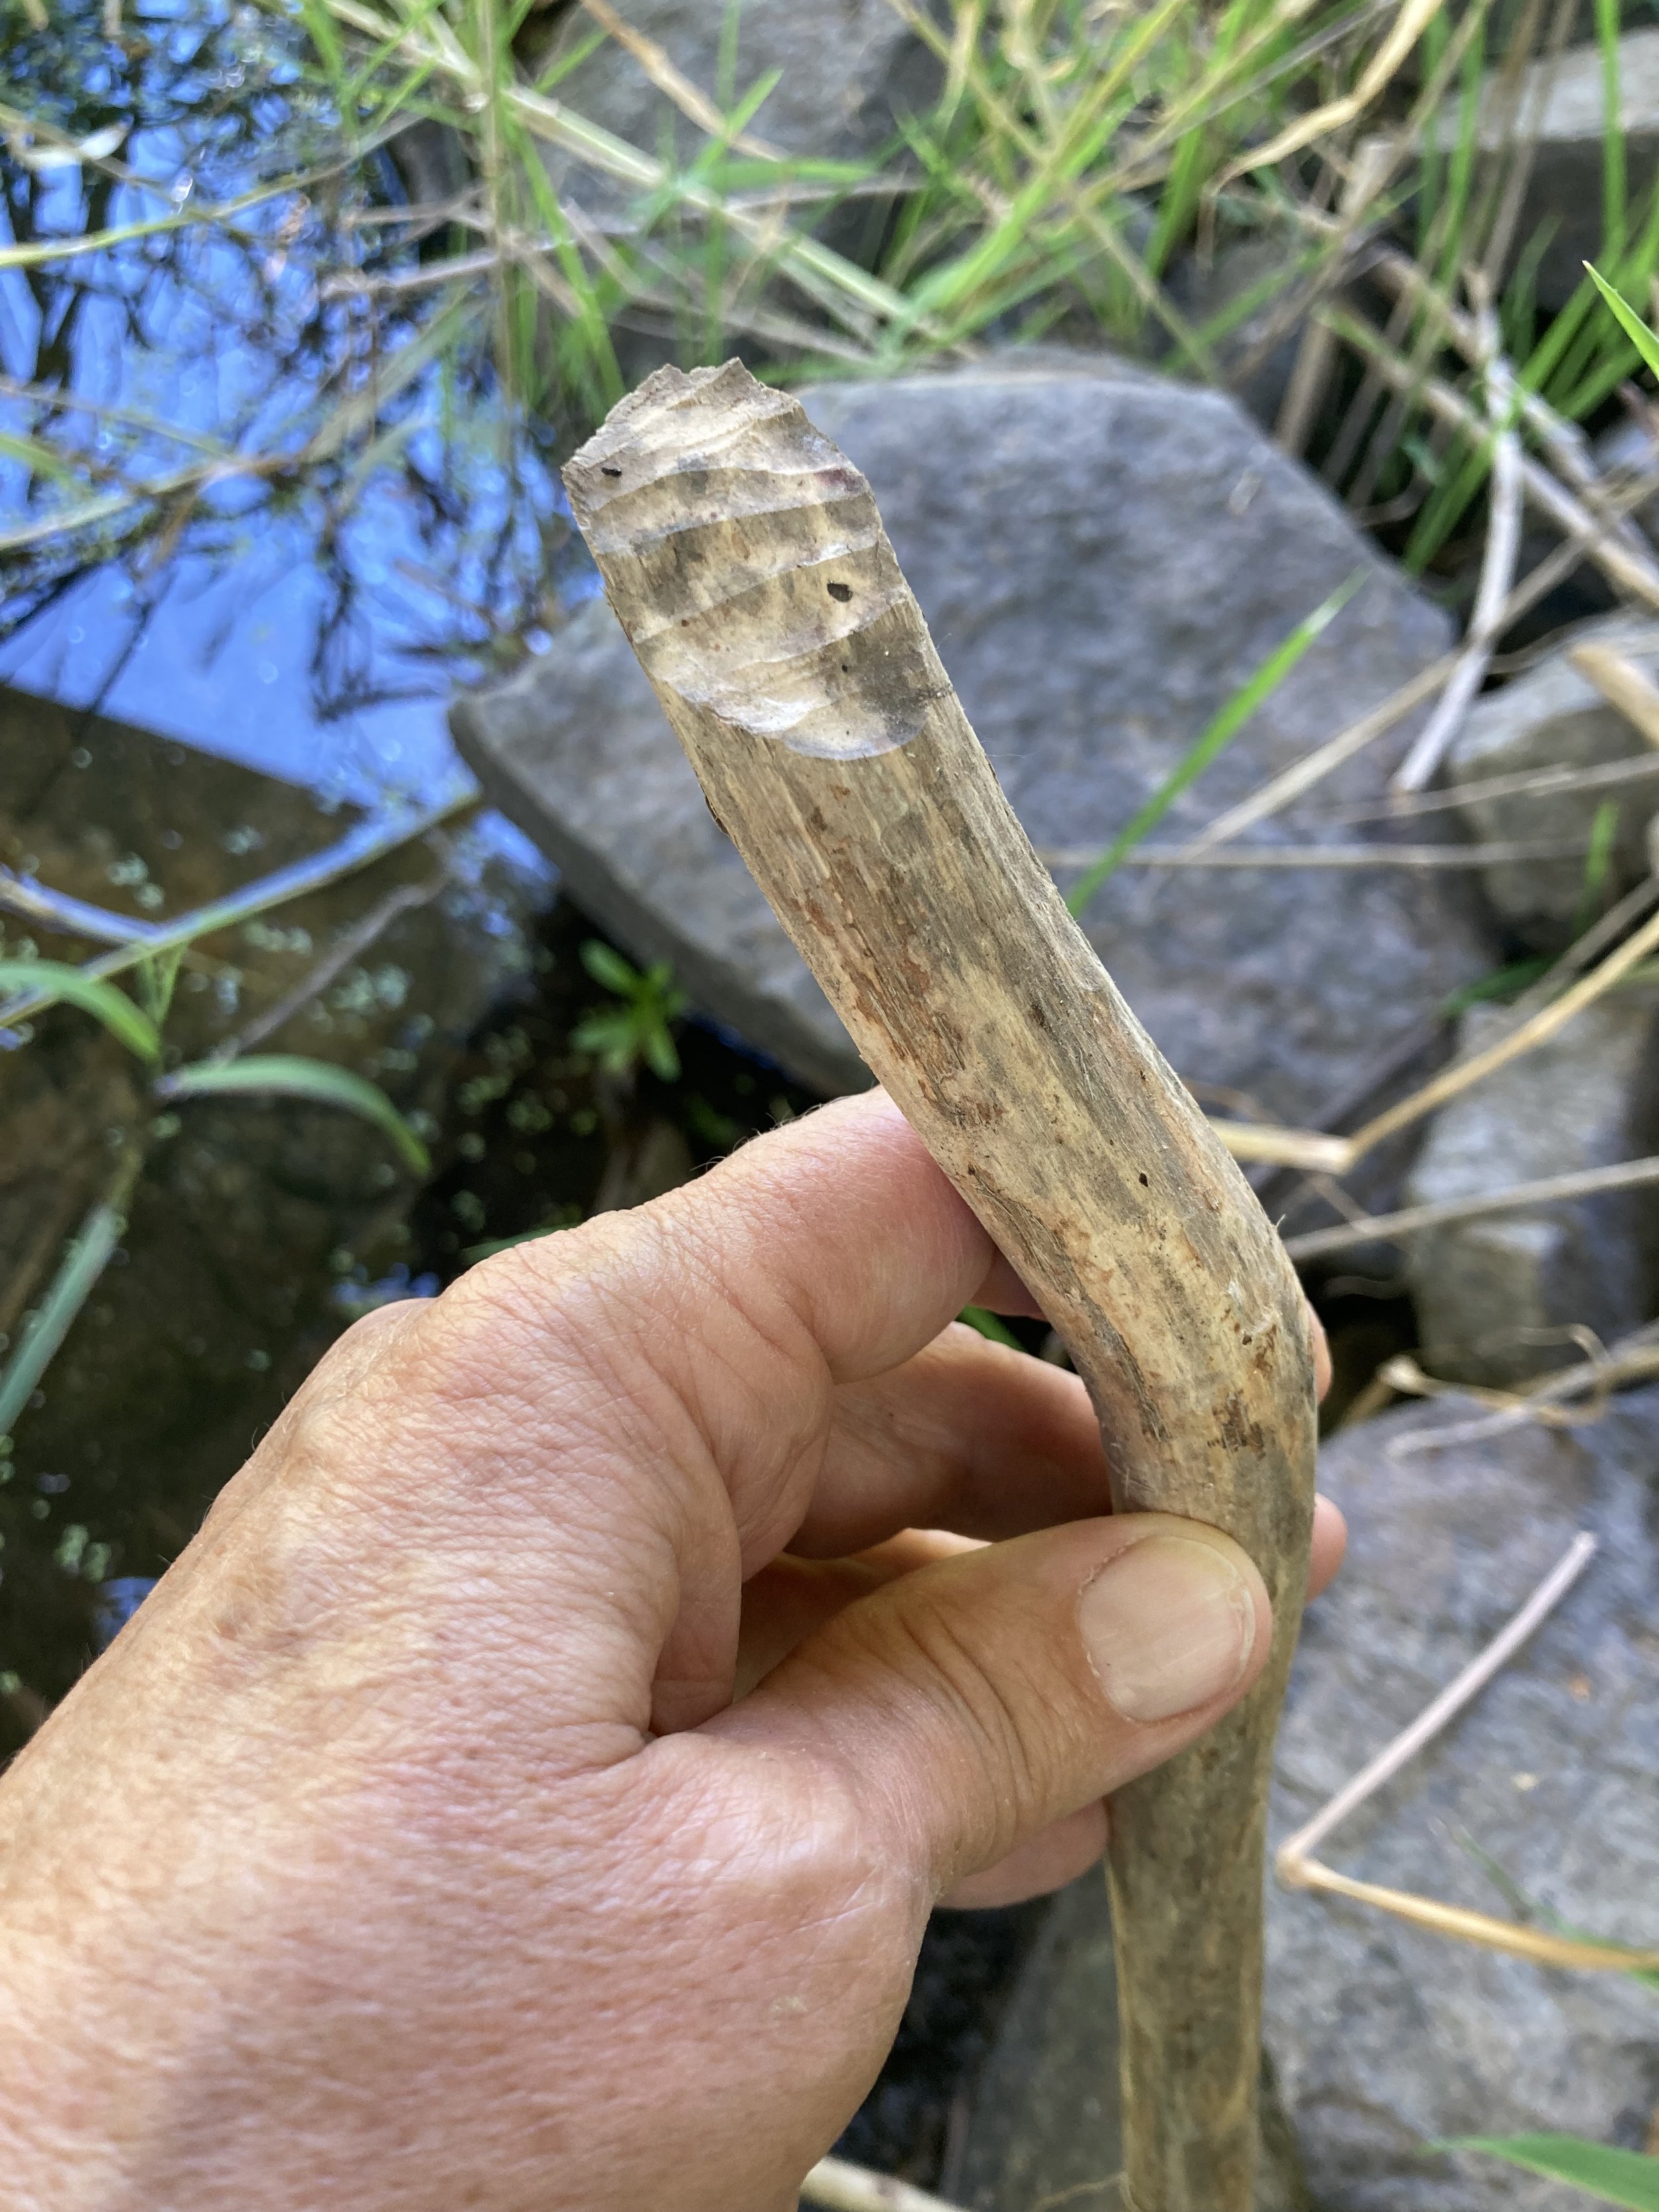  Example of a beaver stick with teeth marks 